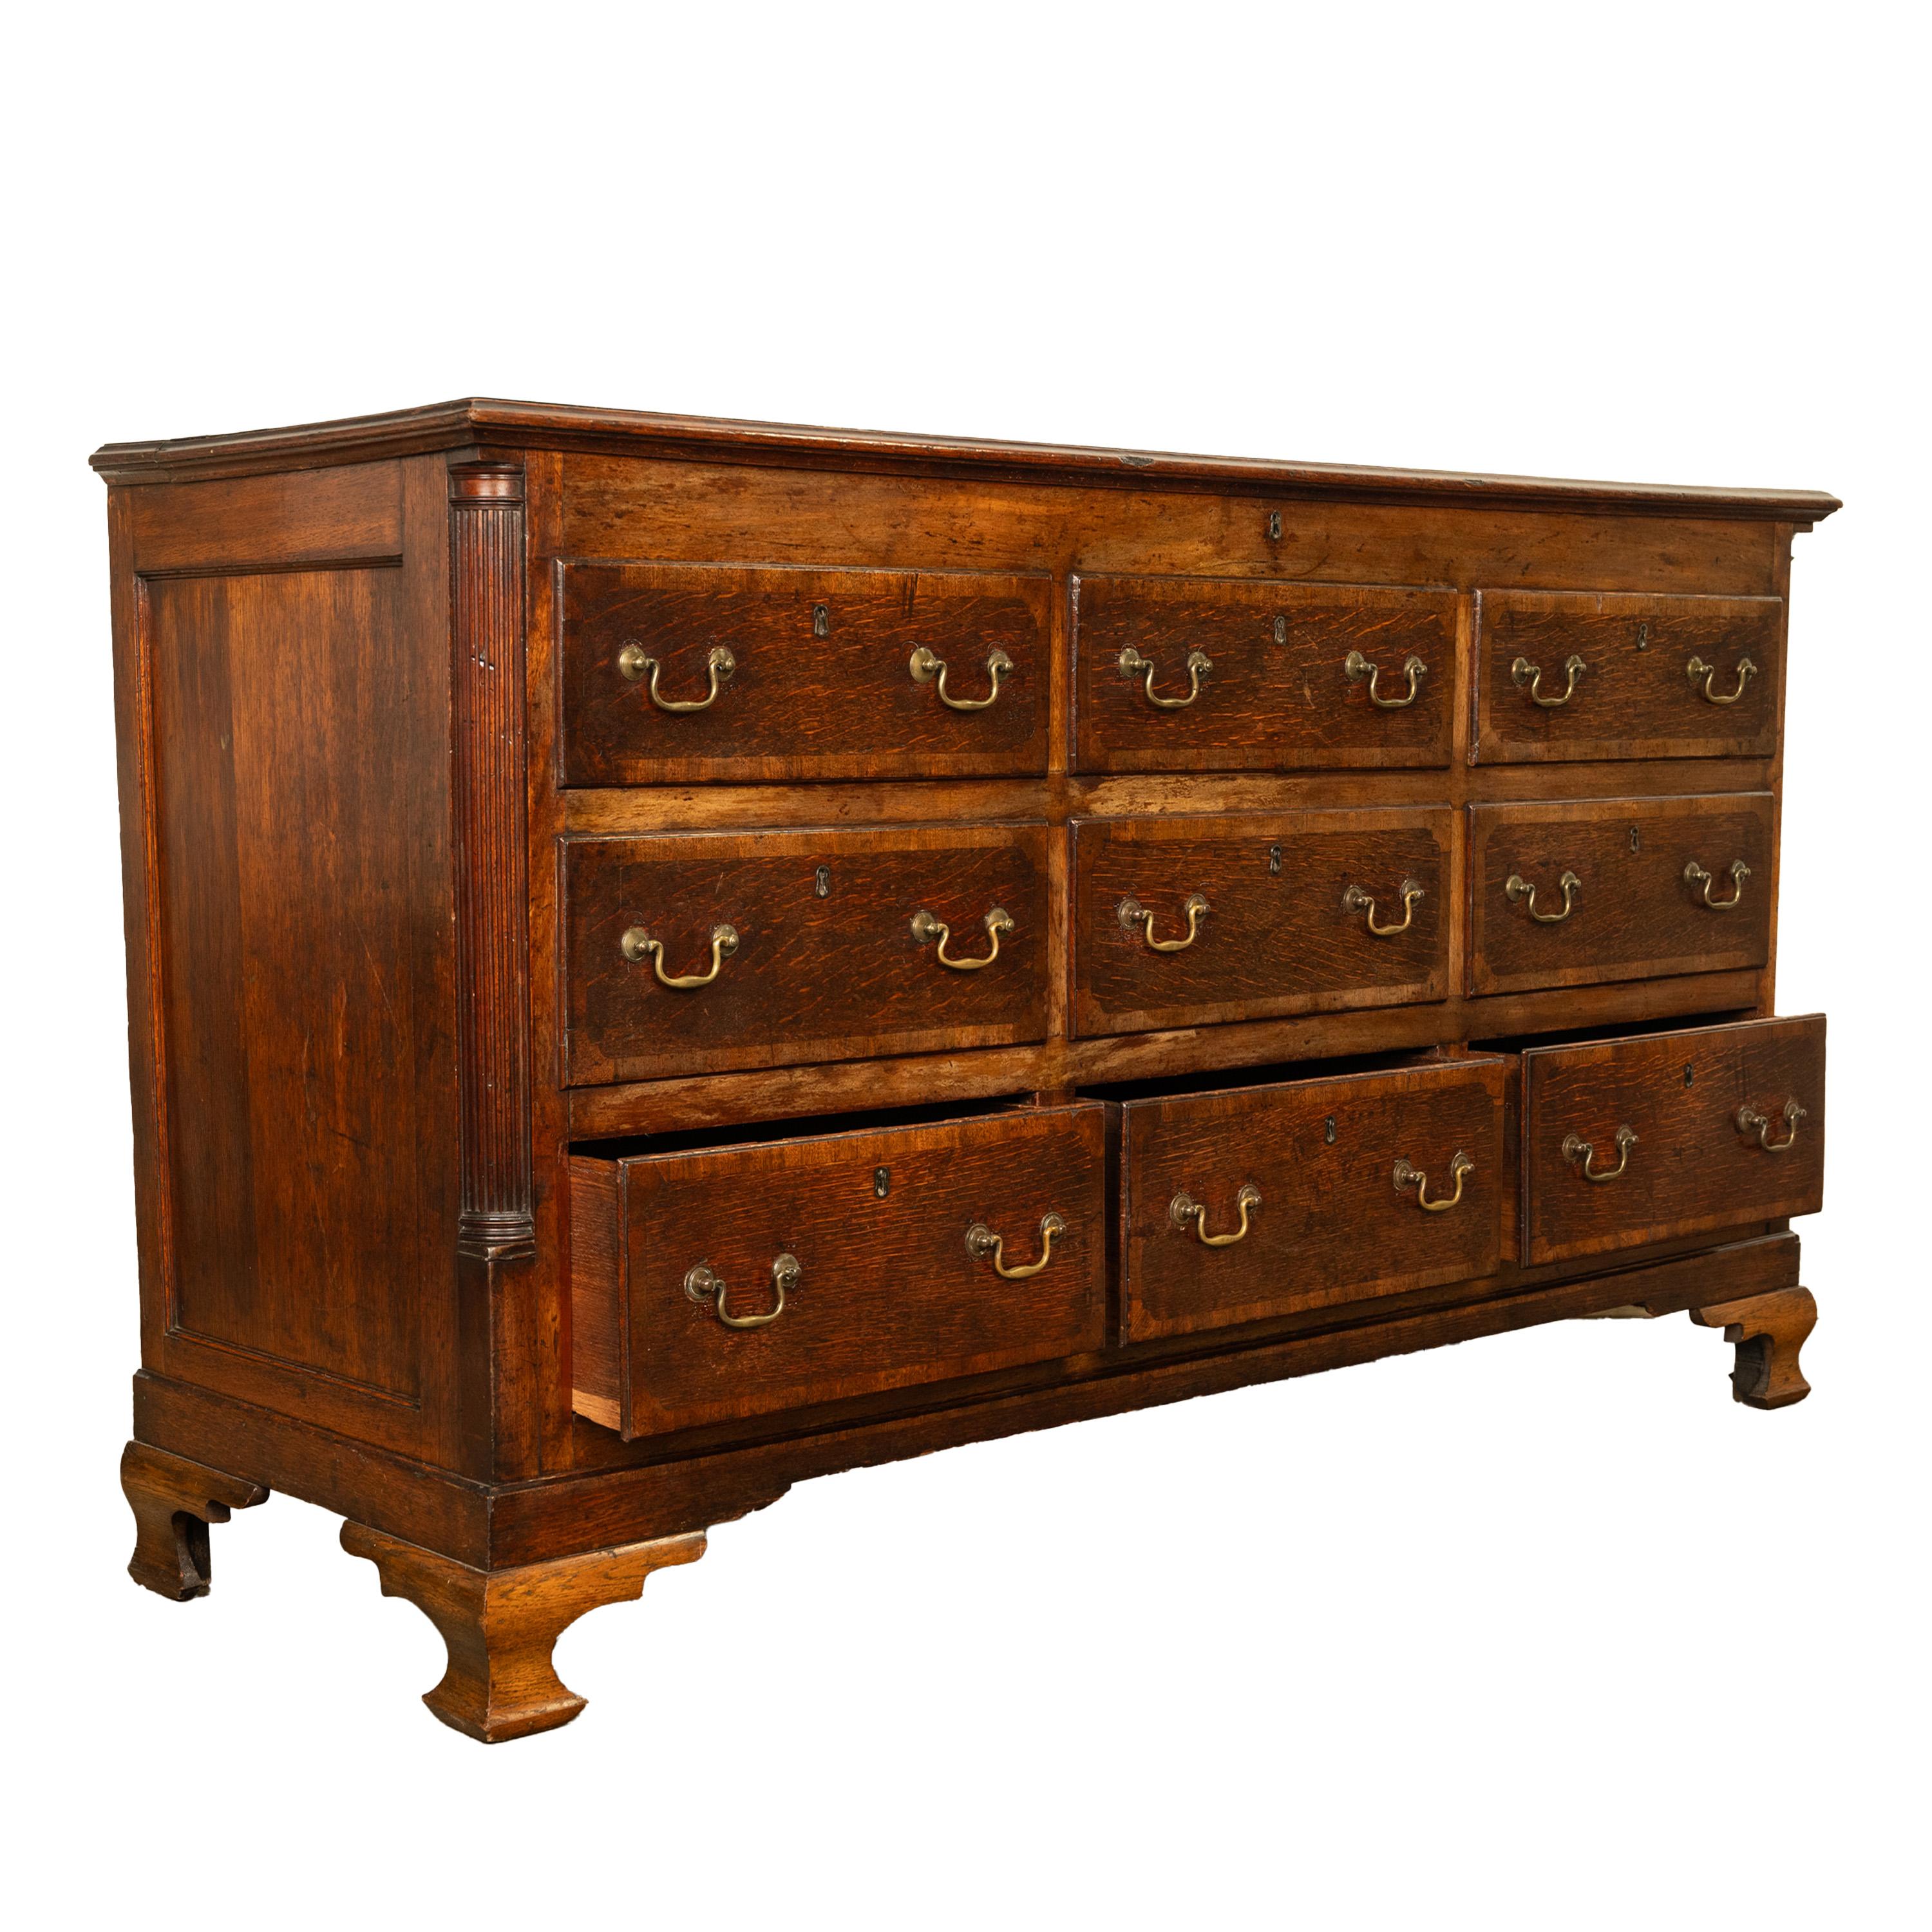 Antique 18th C Georgian Oak Mahogany Hinged Top Mule Chest Coffer Sideboard 1770 For Sale 4